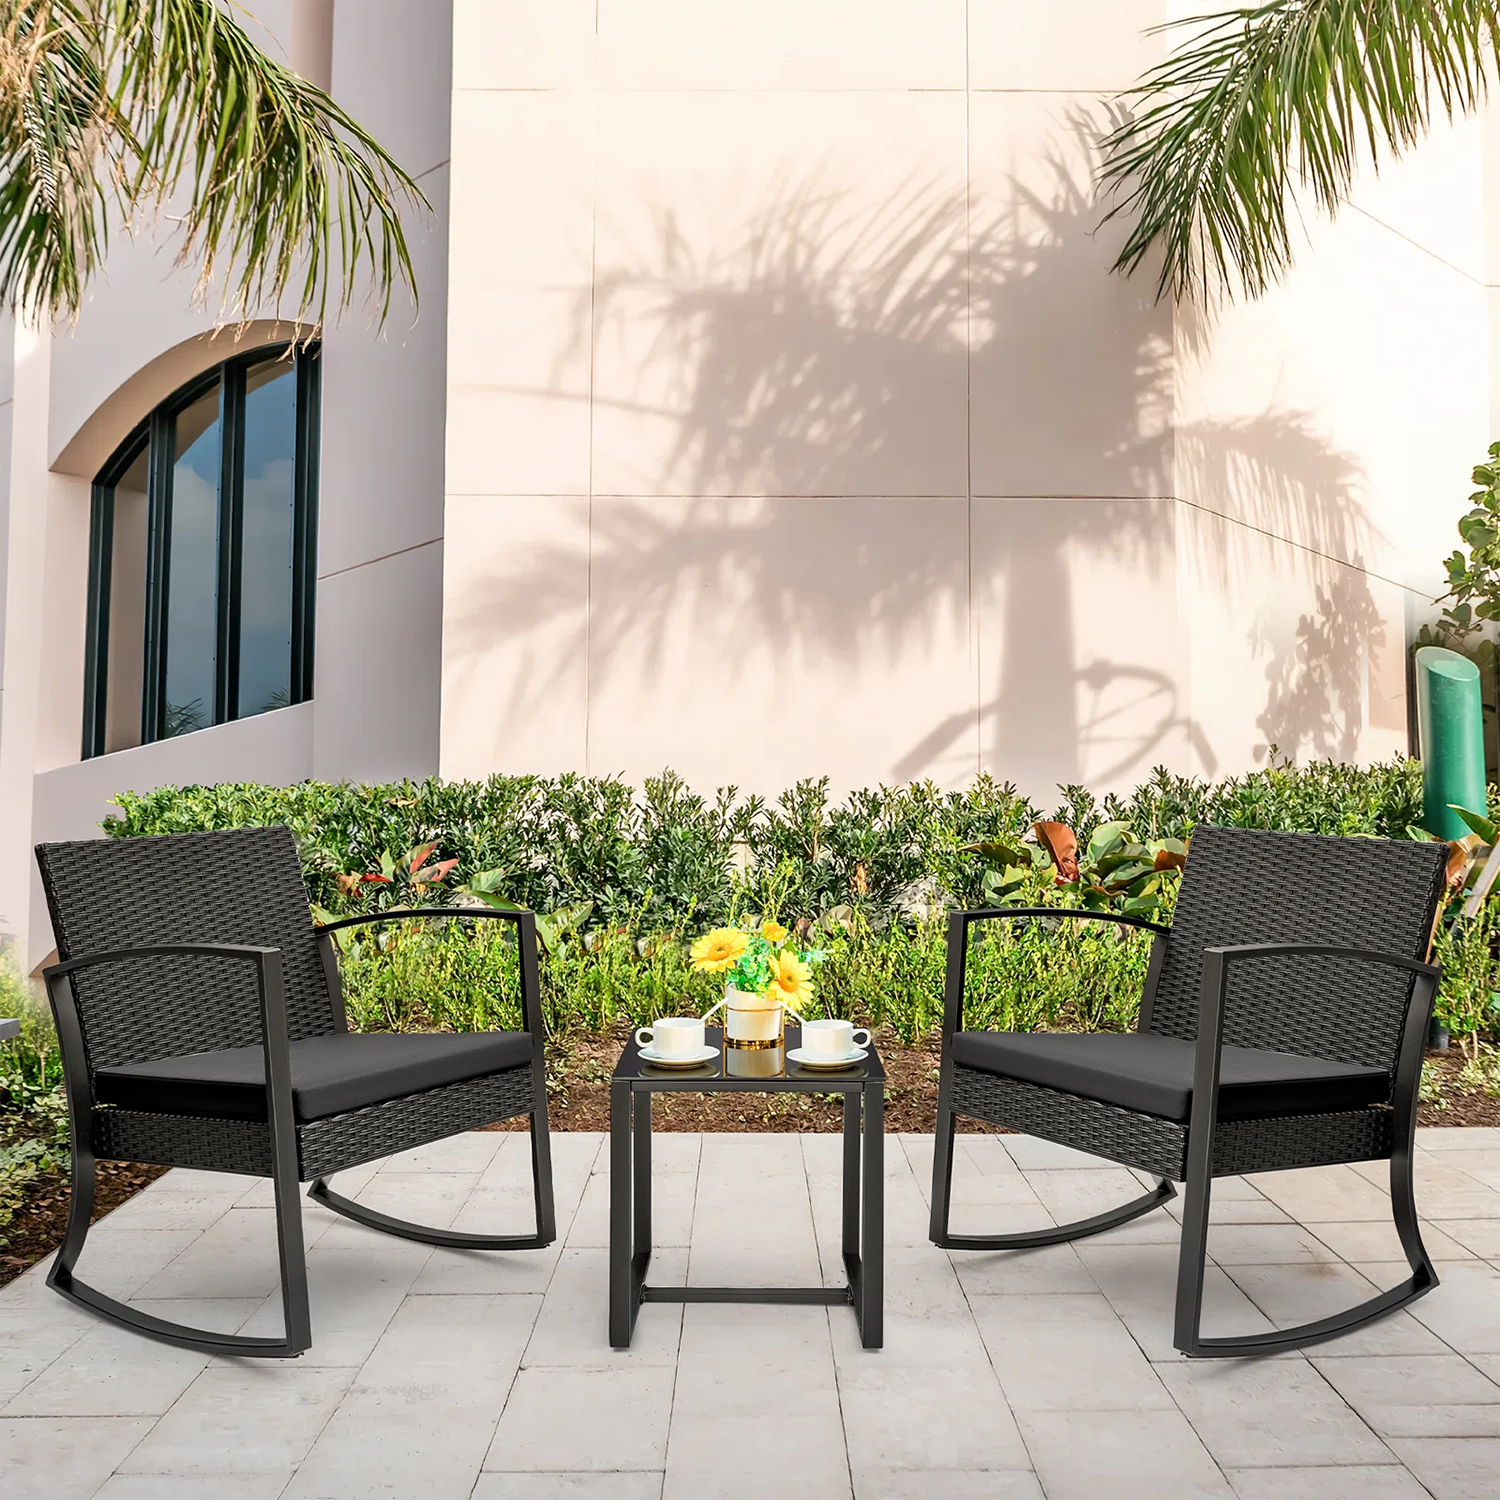 Lowes Patio Furniture Clearance  Patio furniture for sale, Clearance patio  furniture, Patio furniture